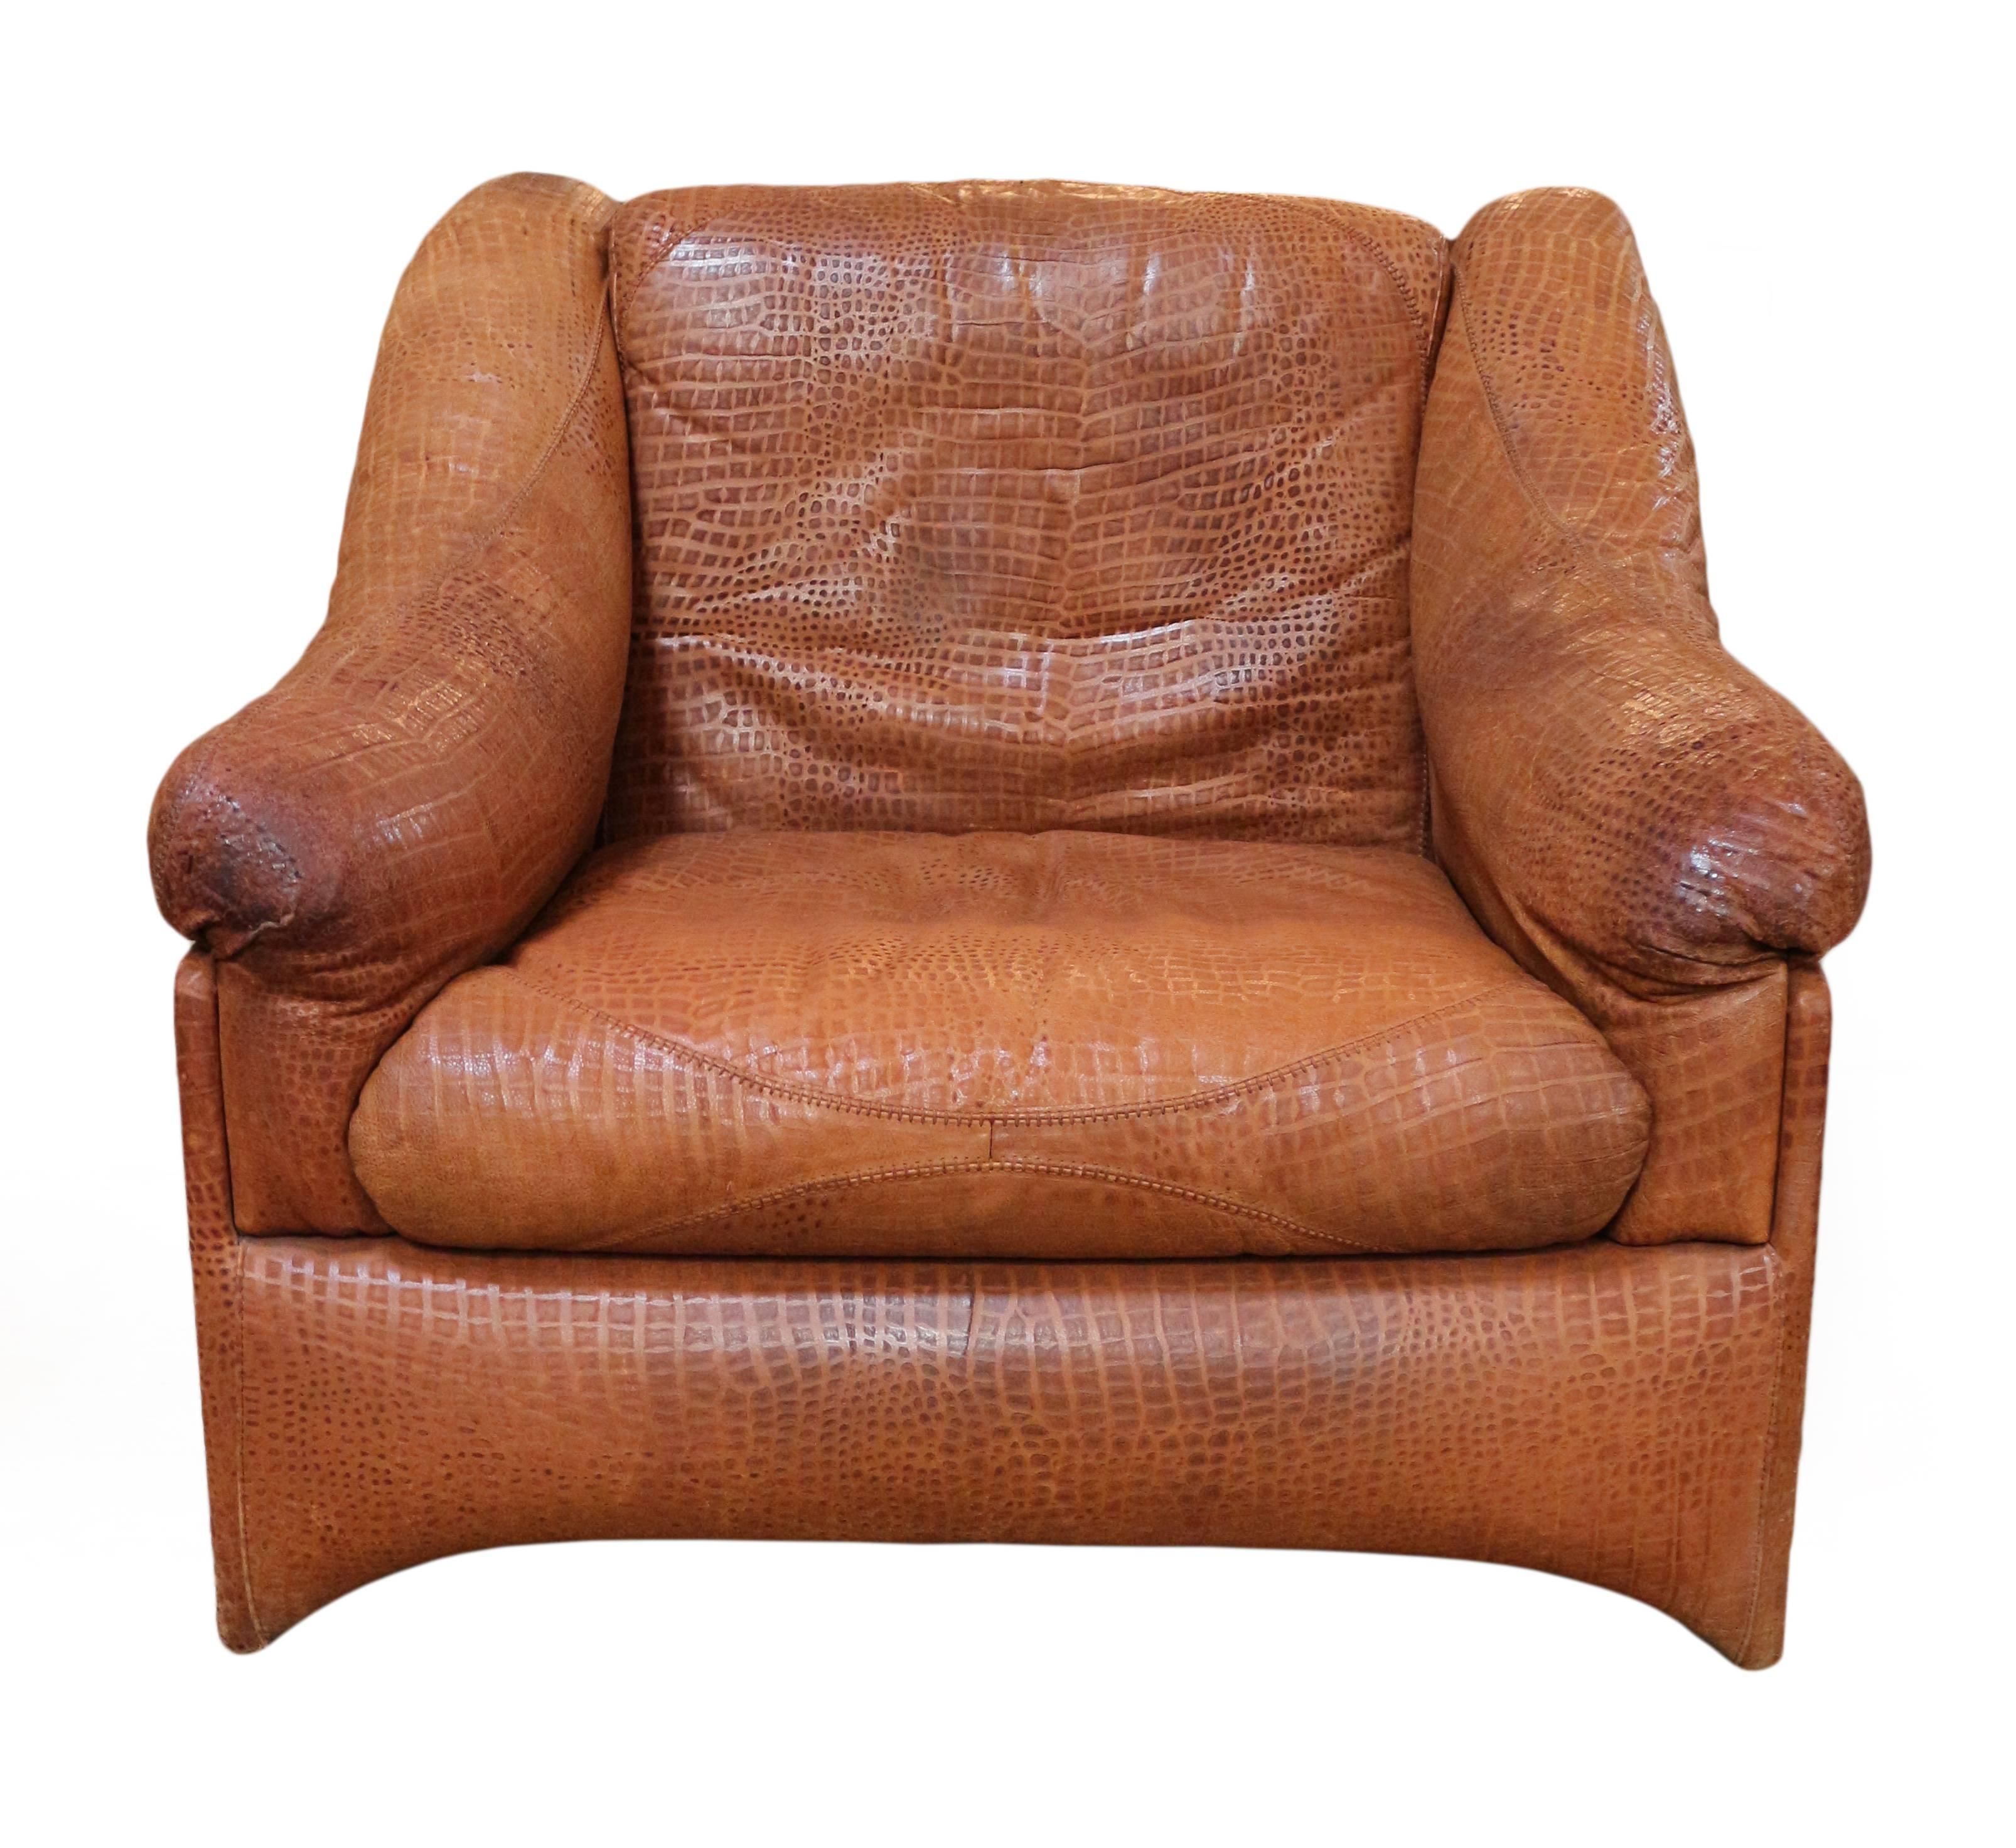 Pair of Valenti leather armchairs.